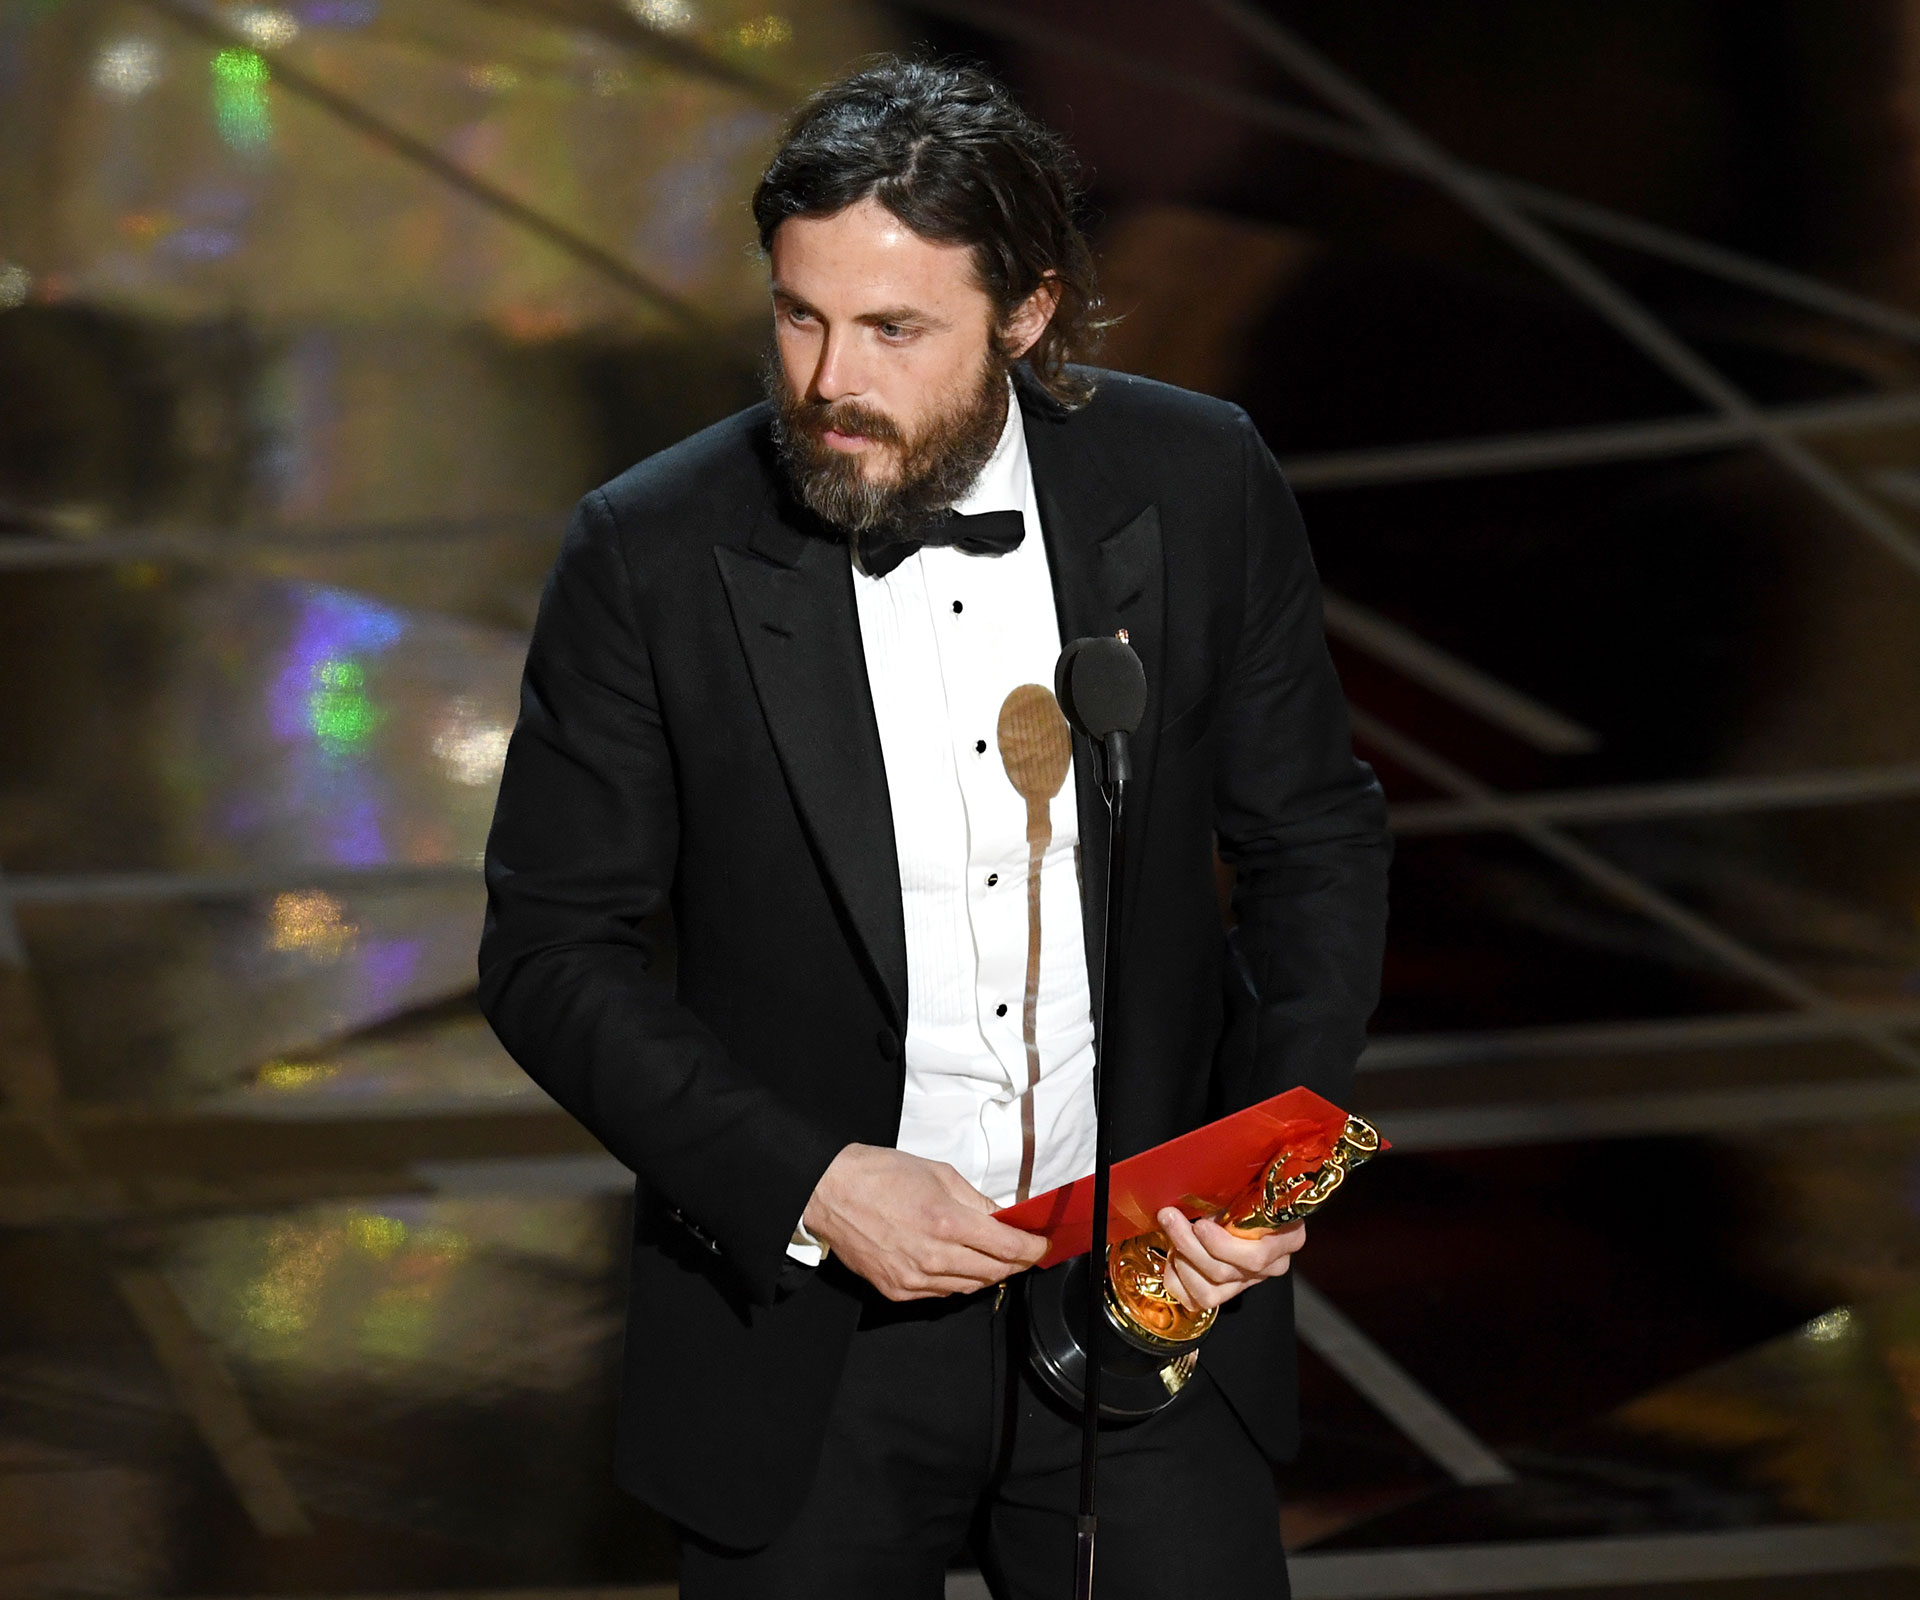 Casey Affleck wins Best Actor at the 2017 Oscars